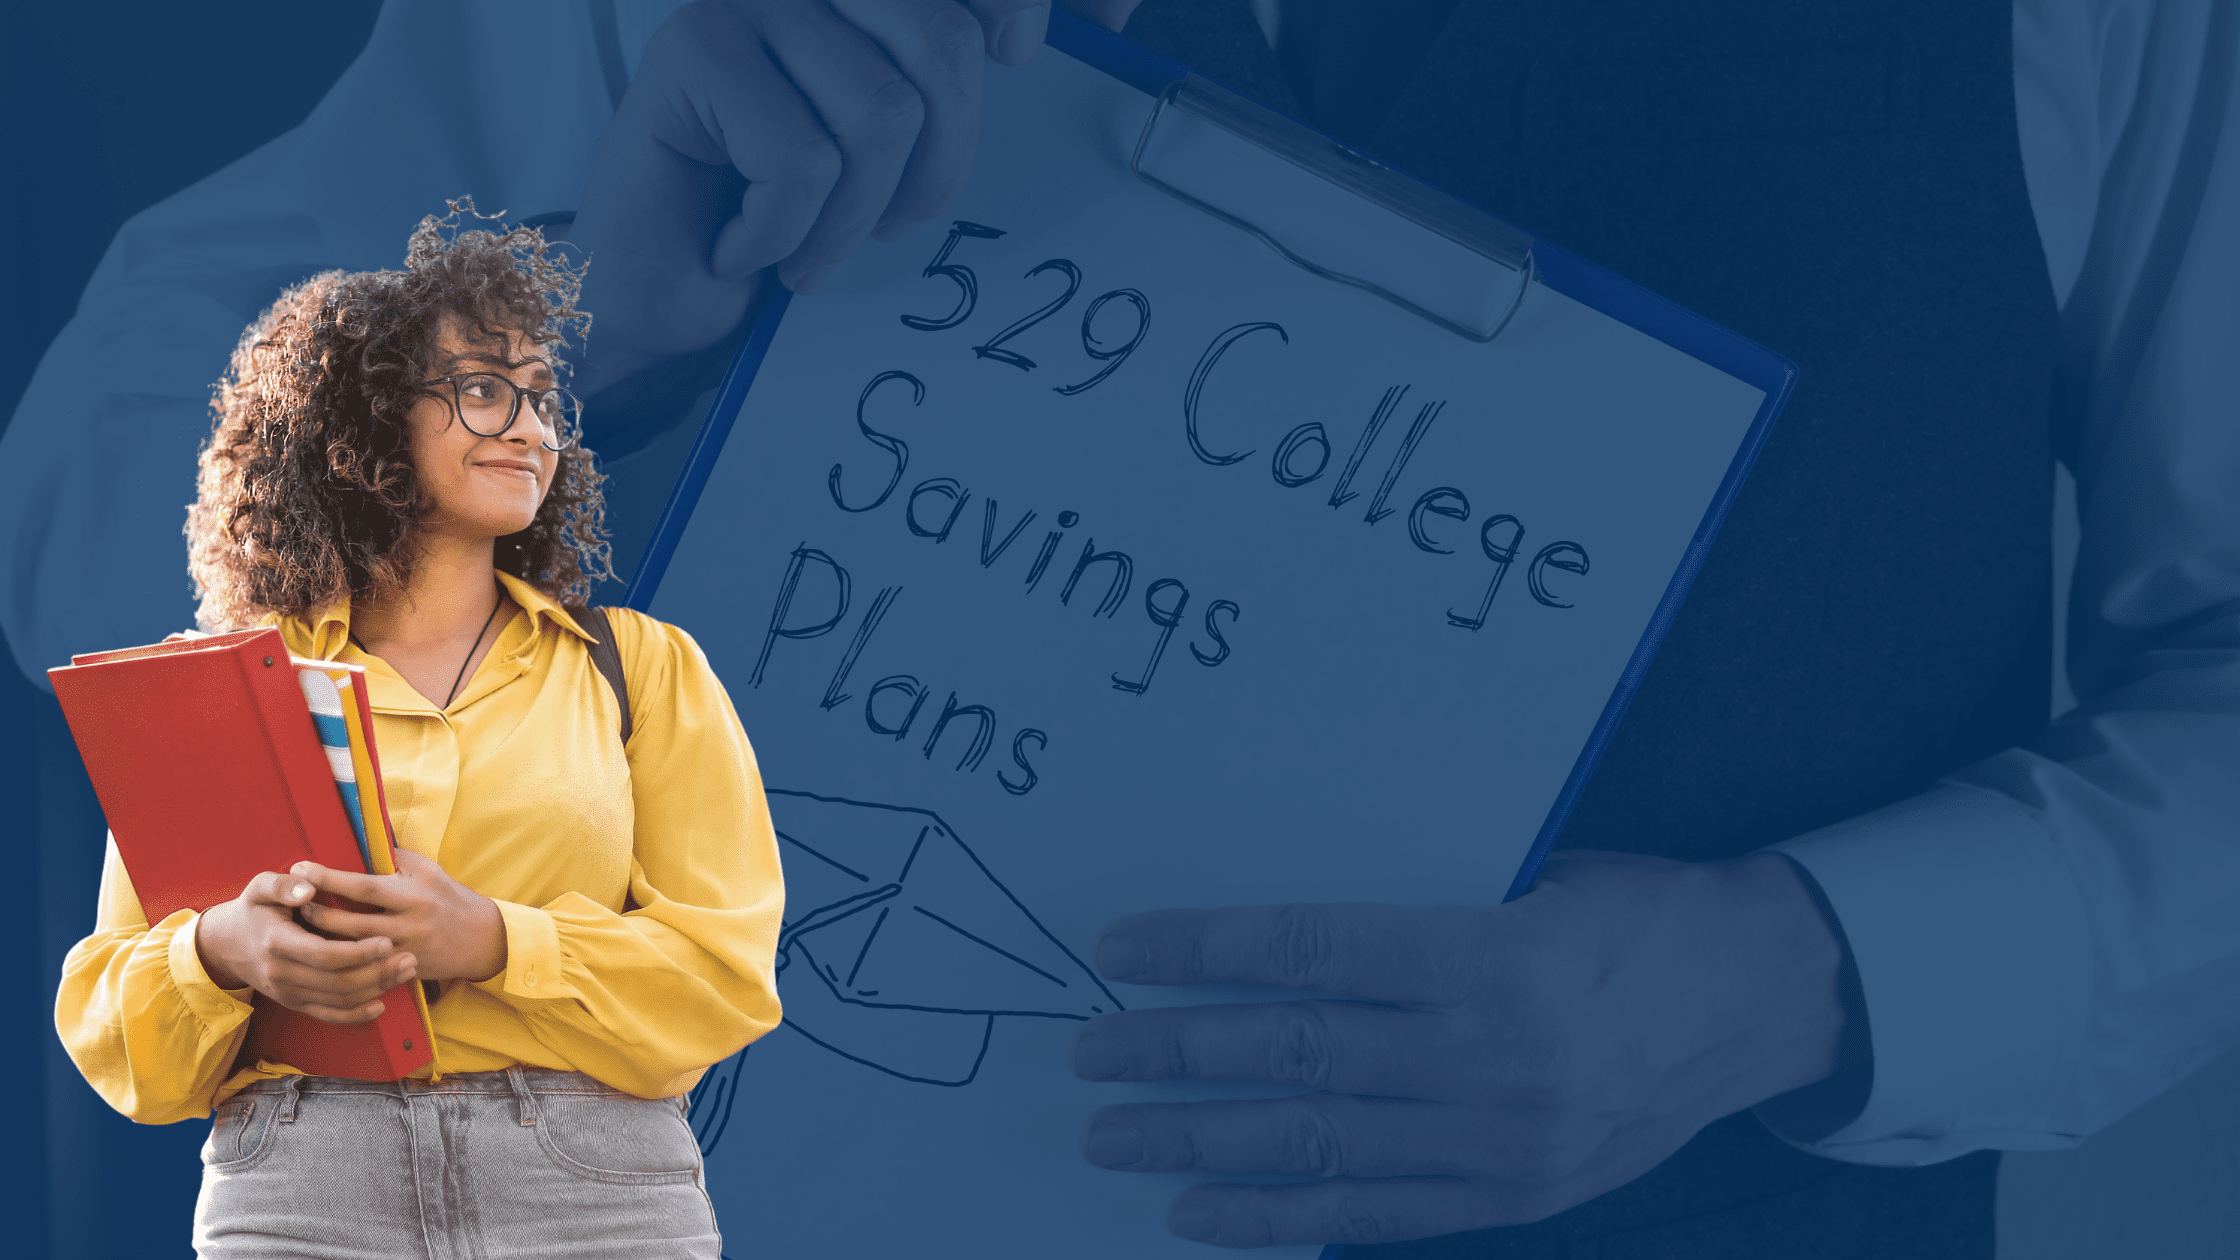 529 College Savings Plans: The Comprehensive Guide